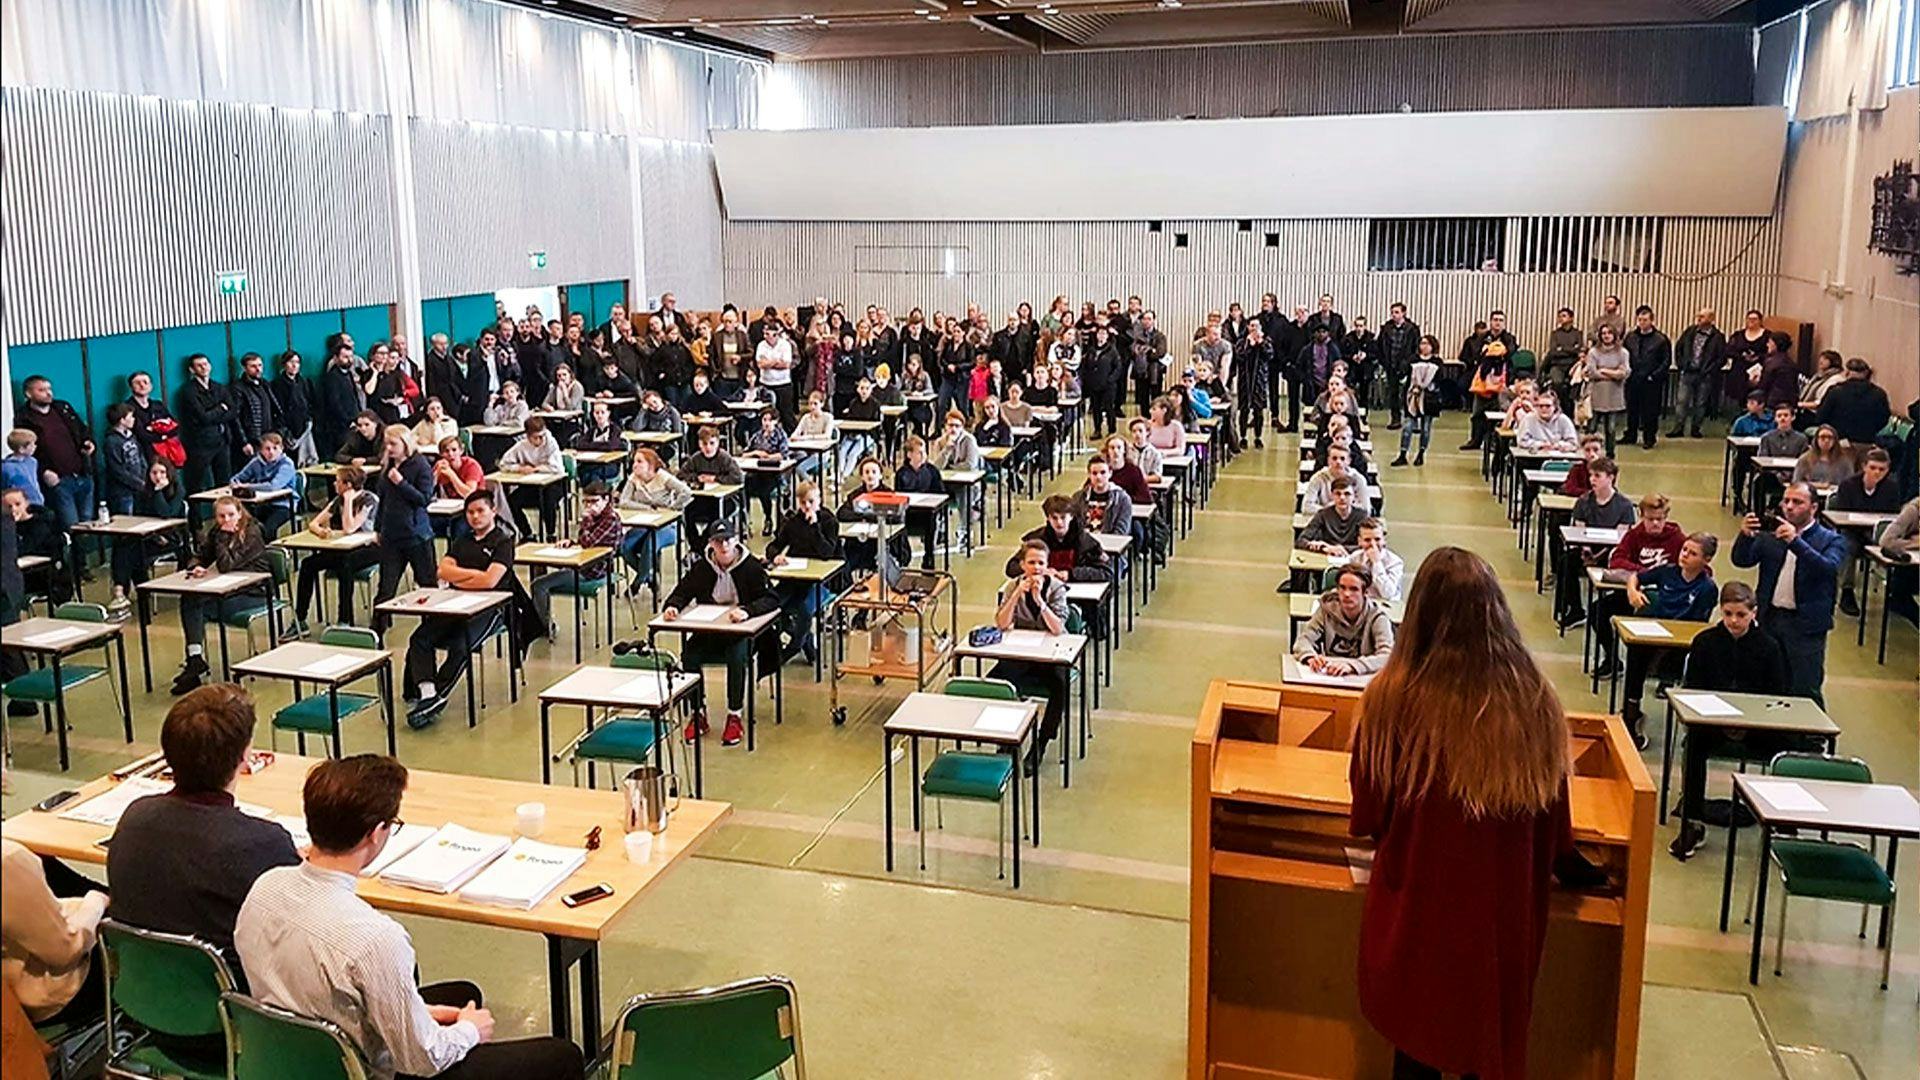 A large hall filled with rows of students seated at individual desks